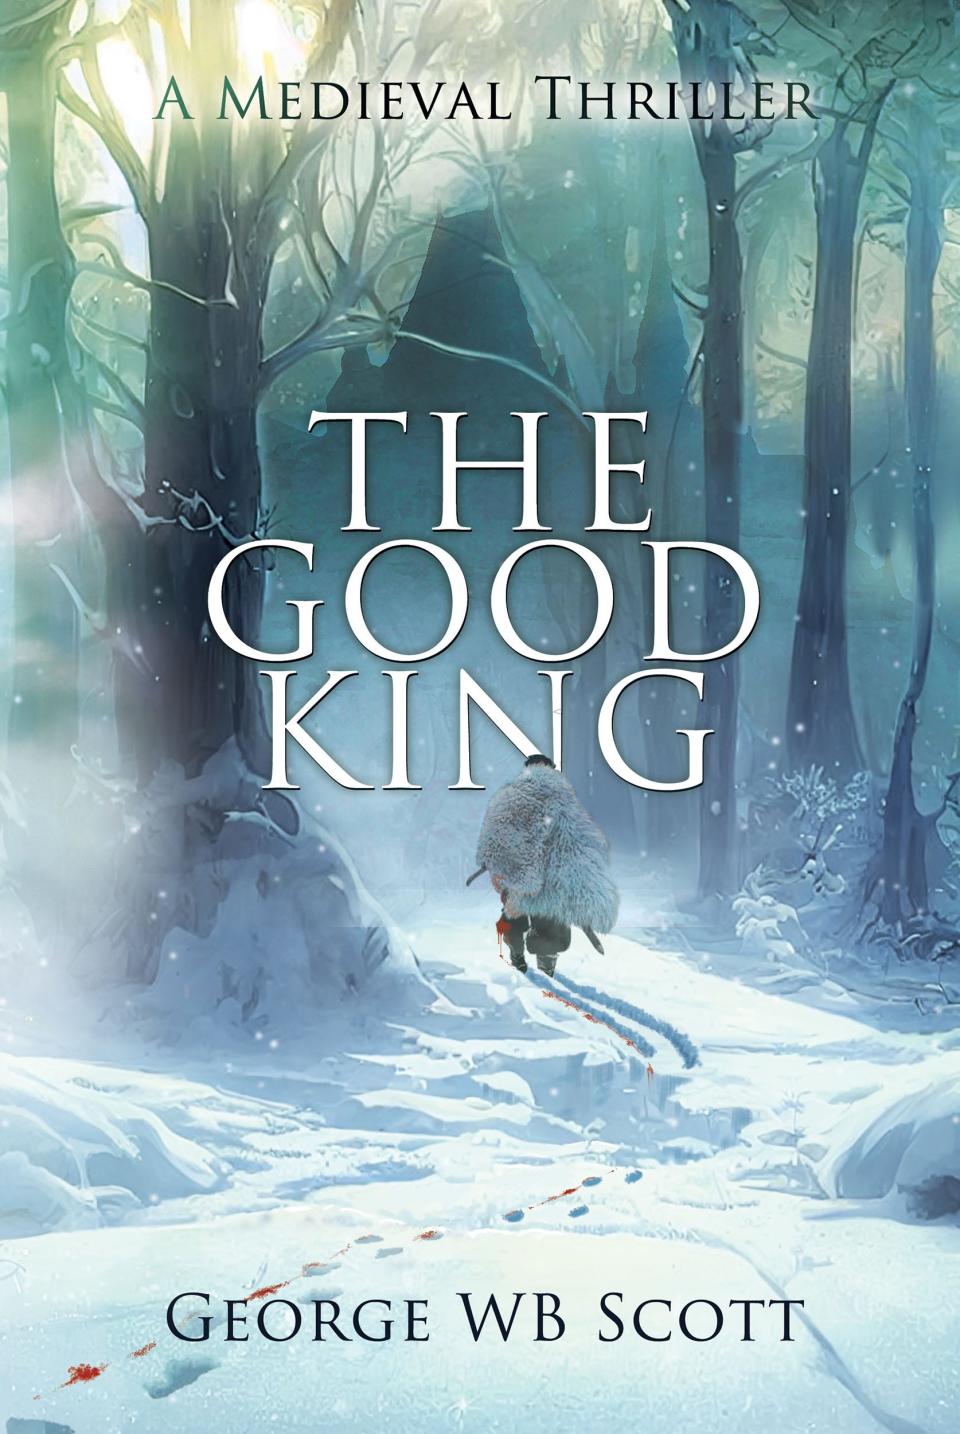 Fountain City author George WB Scott has released his second novel, “The Good King,” based on the life of the patron saint of Bohemia, known as Wenceslas.